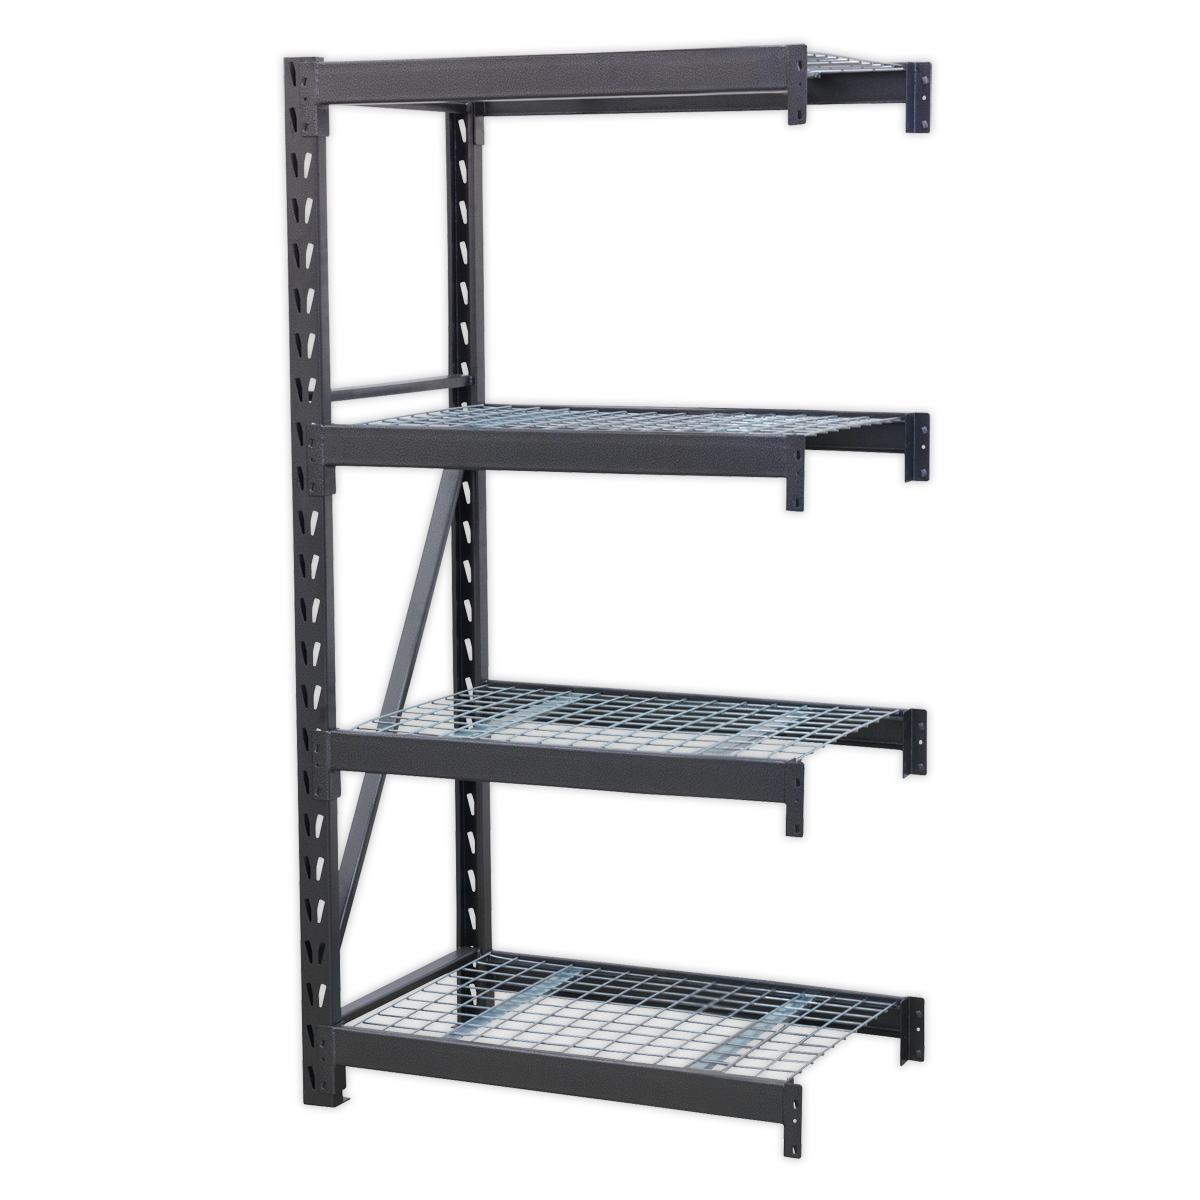 Sealey Heavy-Duty Racking Extension Pack with 4 Mesh Shelves 640kg Capacity Per Level AP6372E